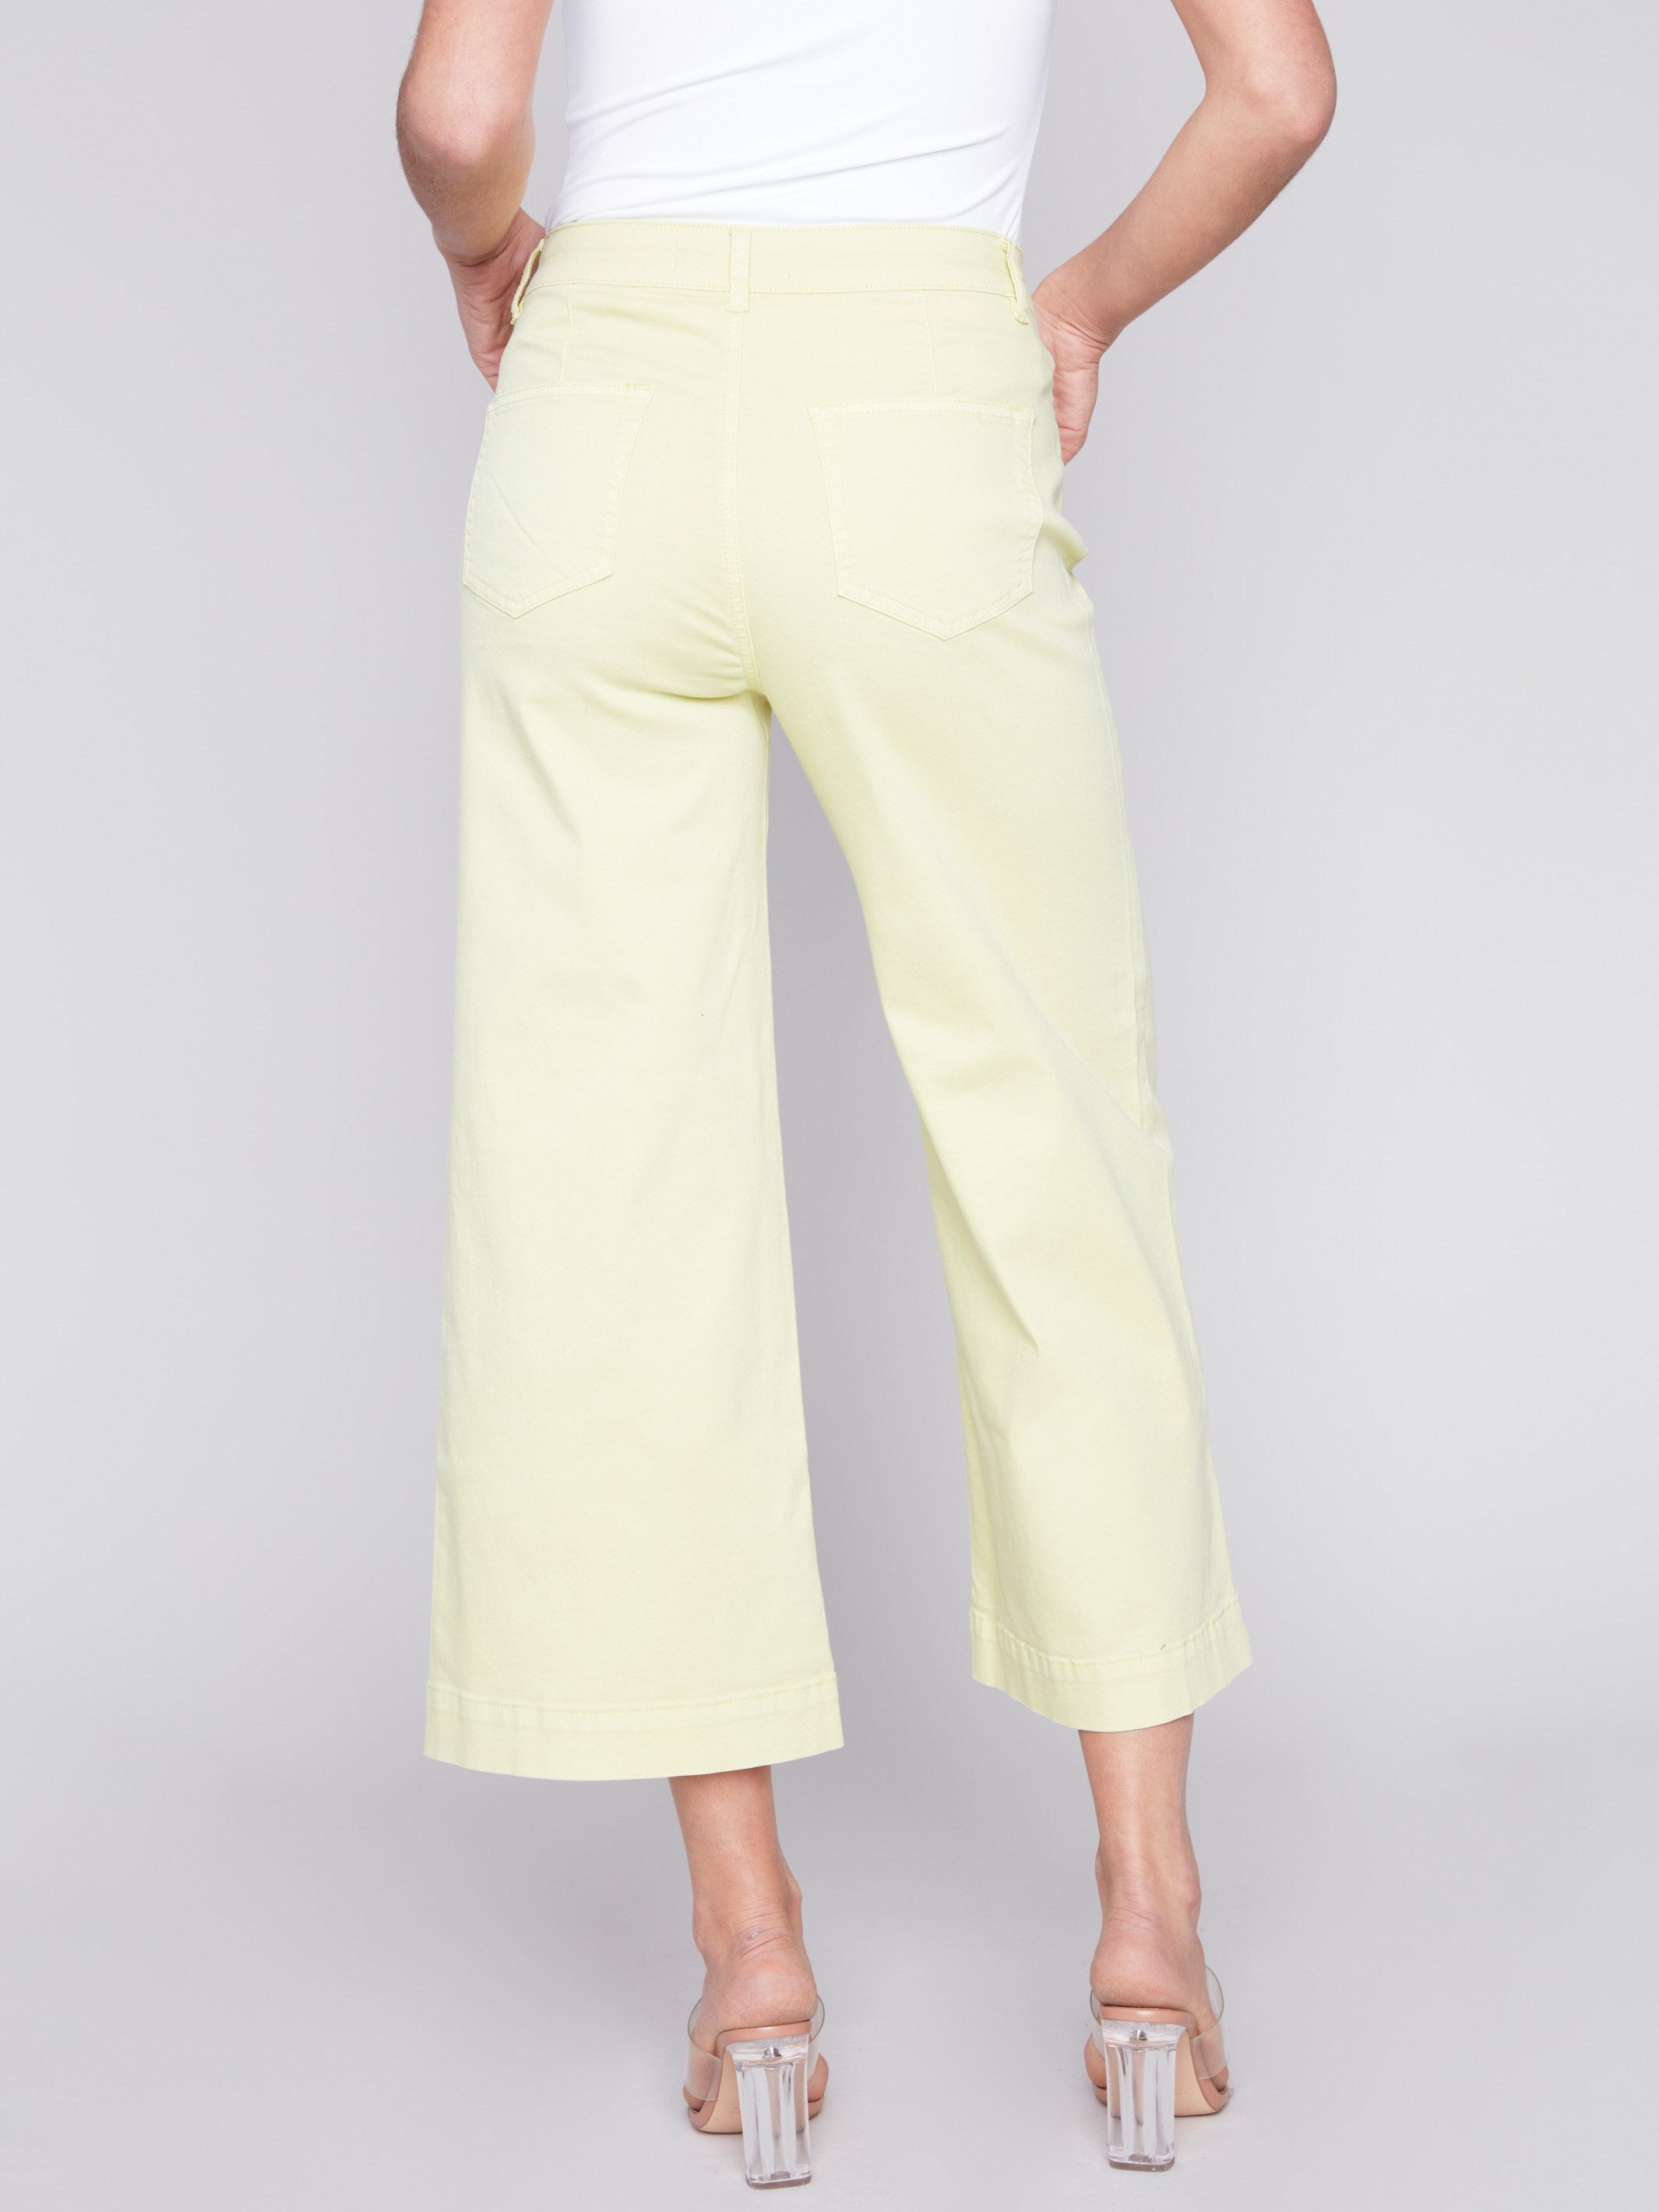 Charlie B Cropped Wide Leg Twill Pants - Anise - Image 3